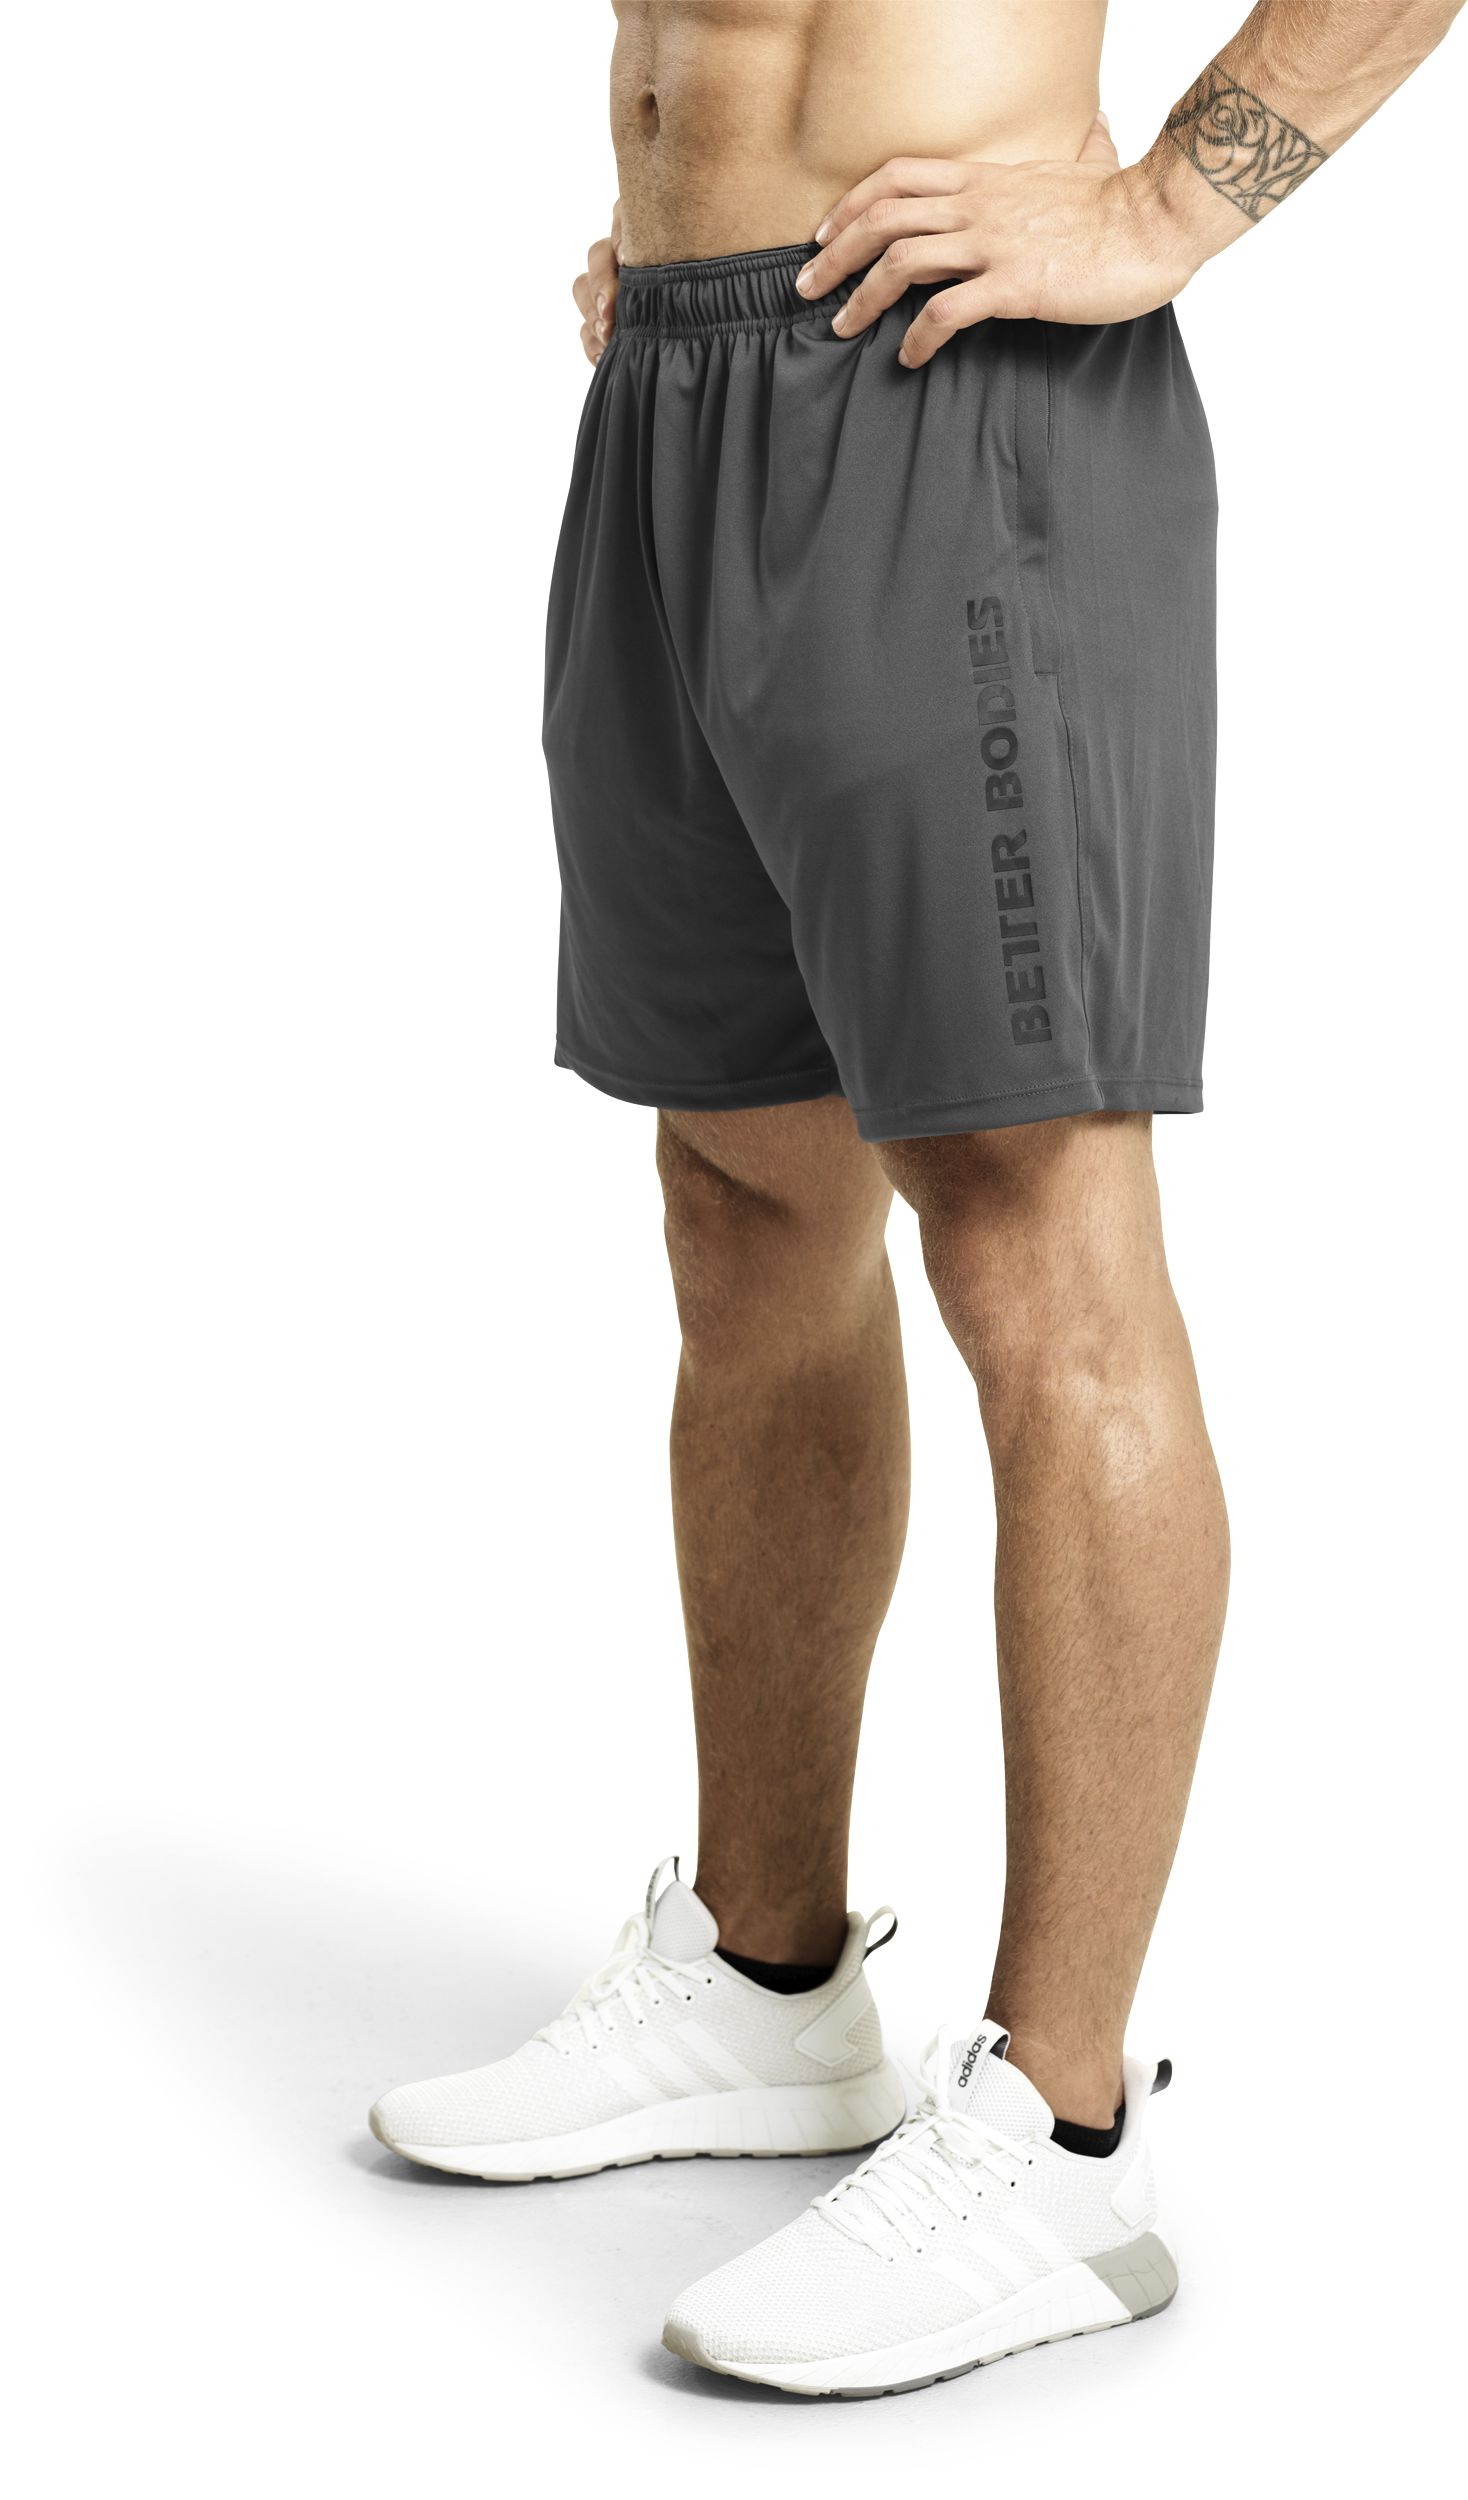 BETTER BODIES, M LOSE FUNCTION SHORTS